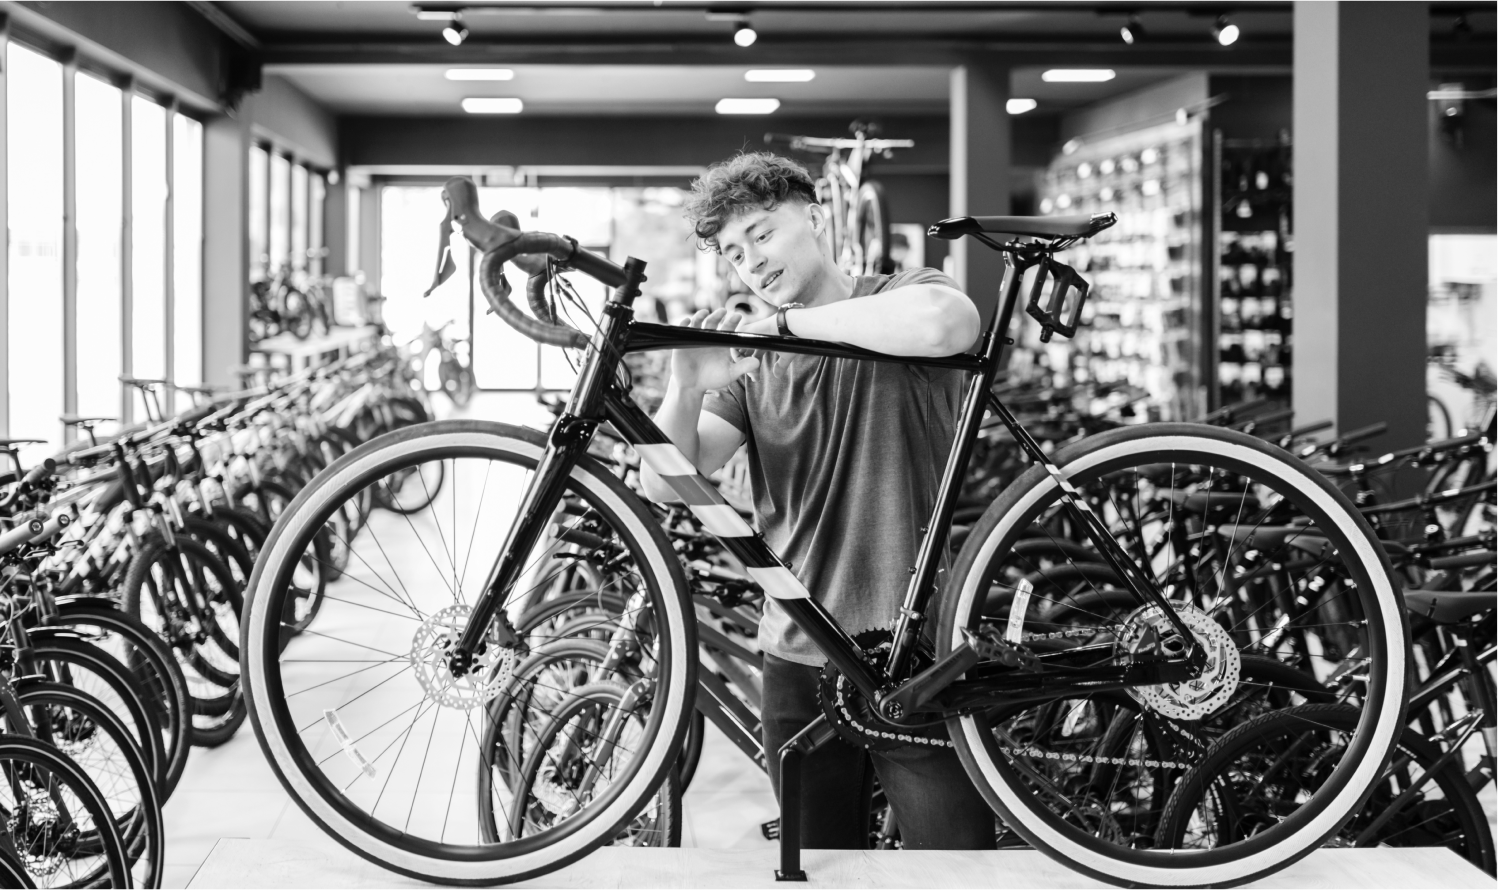 A technician works on a bicycle in a bike shop.